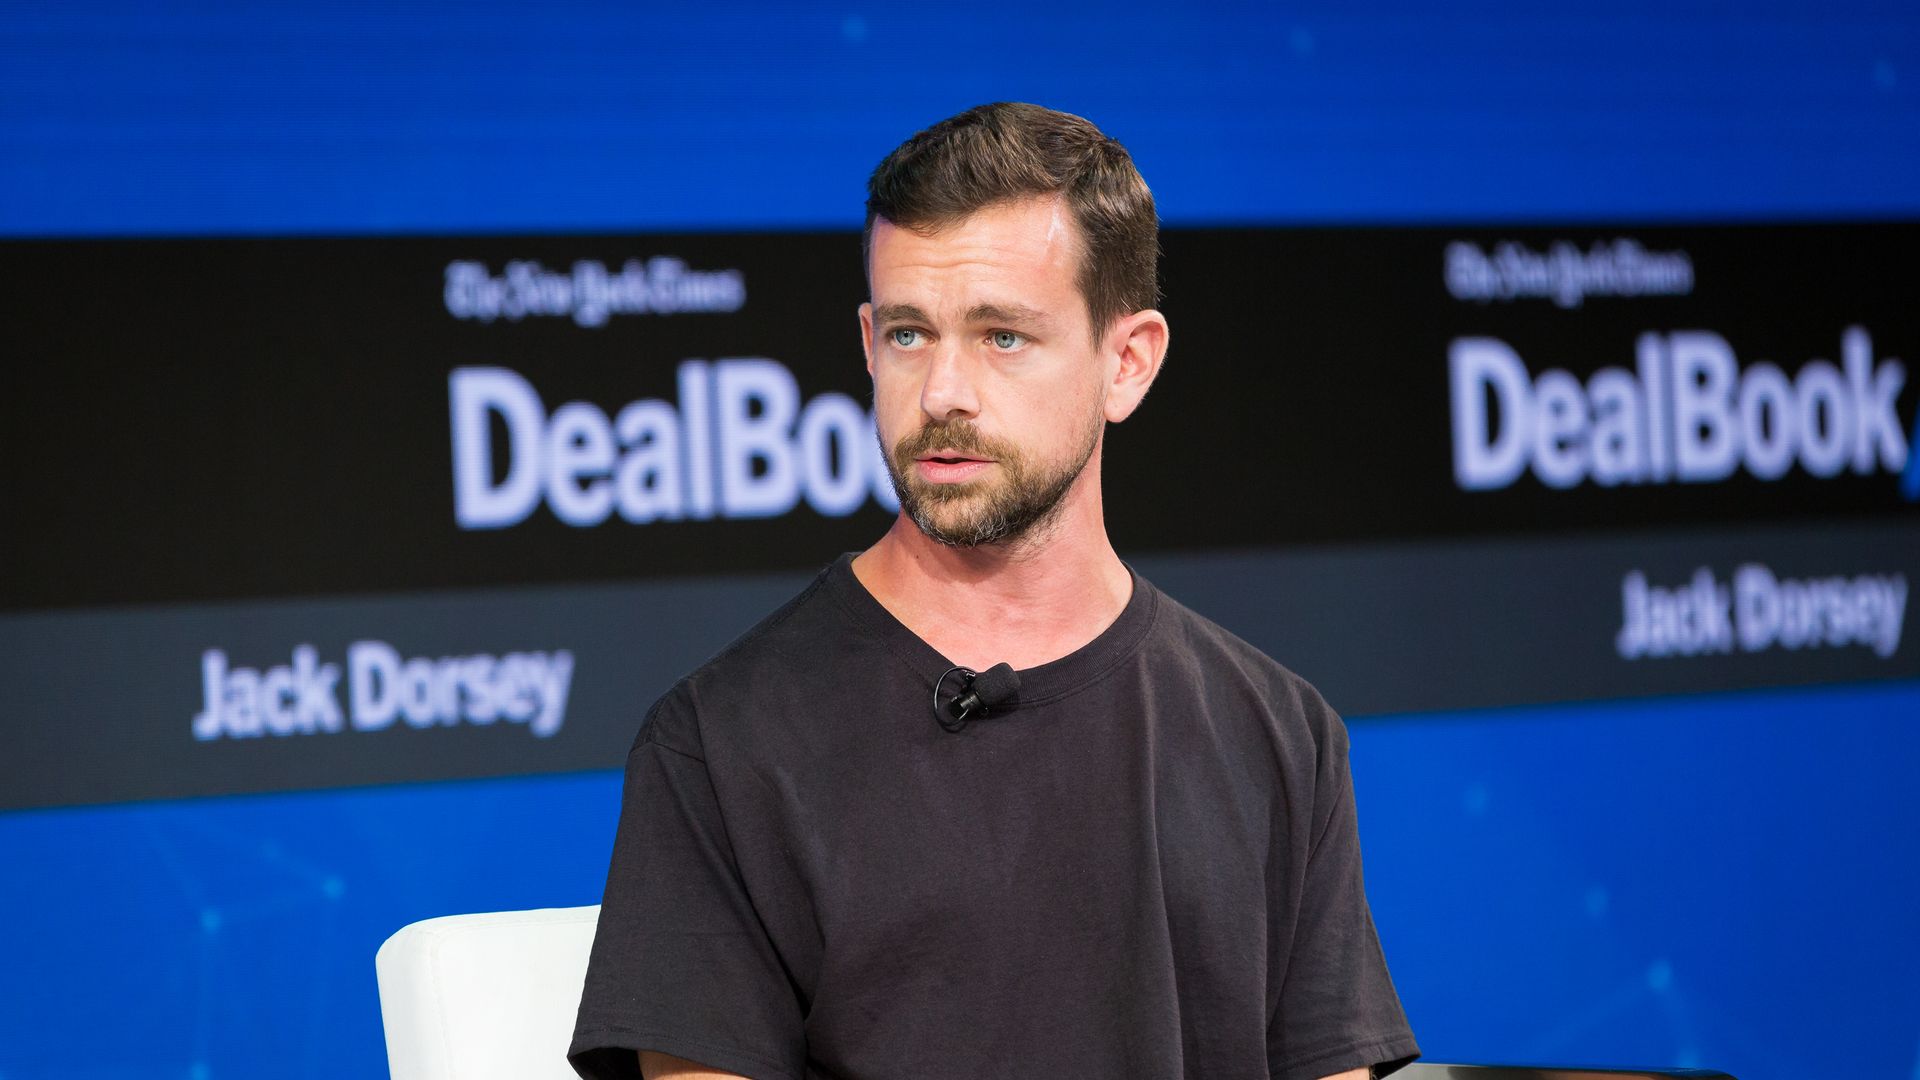 Twitter CEO Jack Dorsey at a New York Times conference